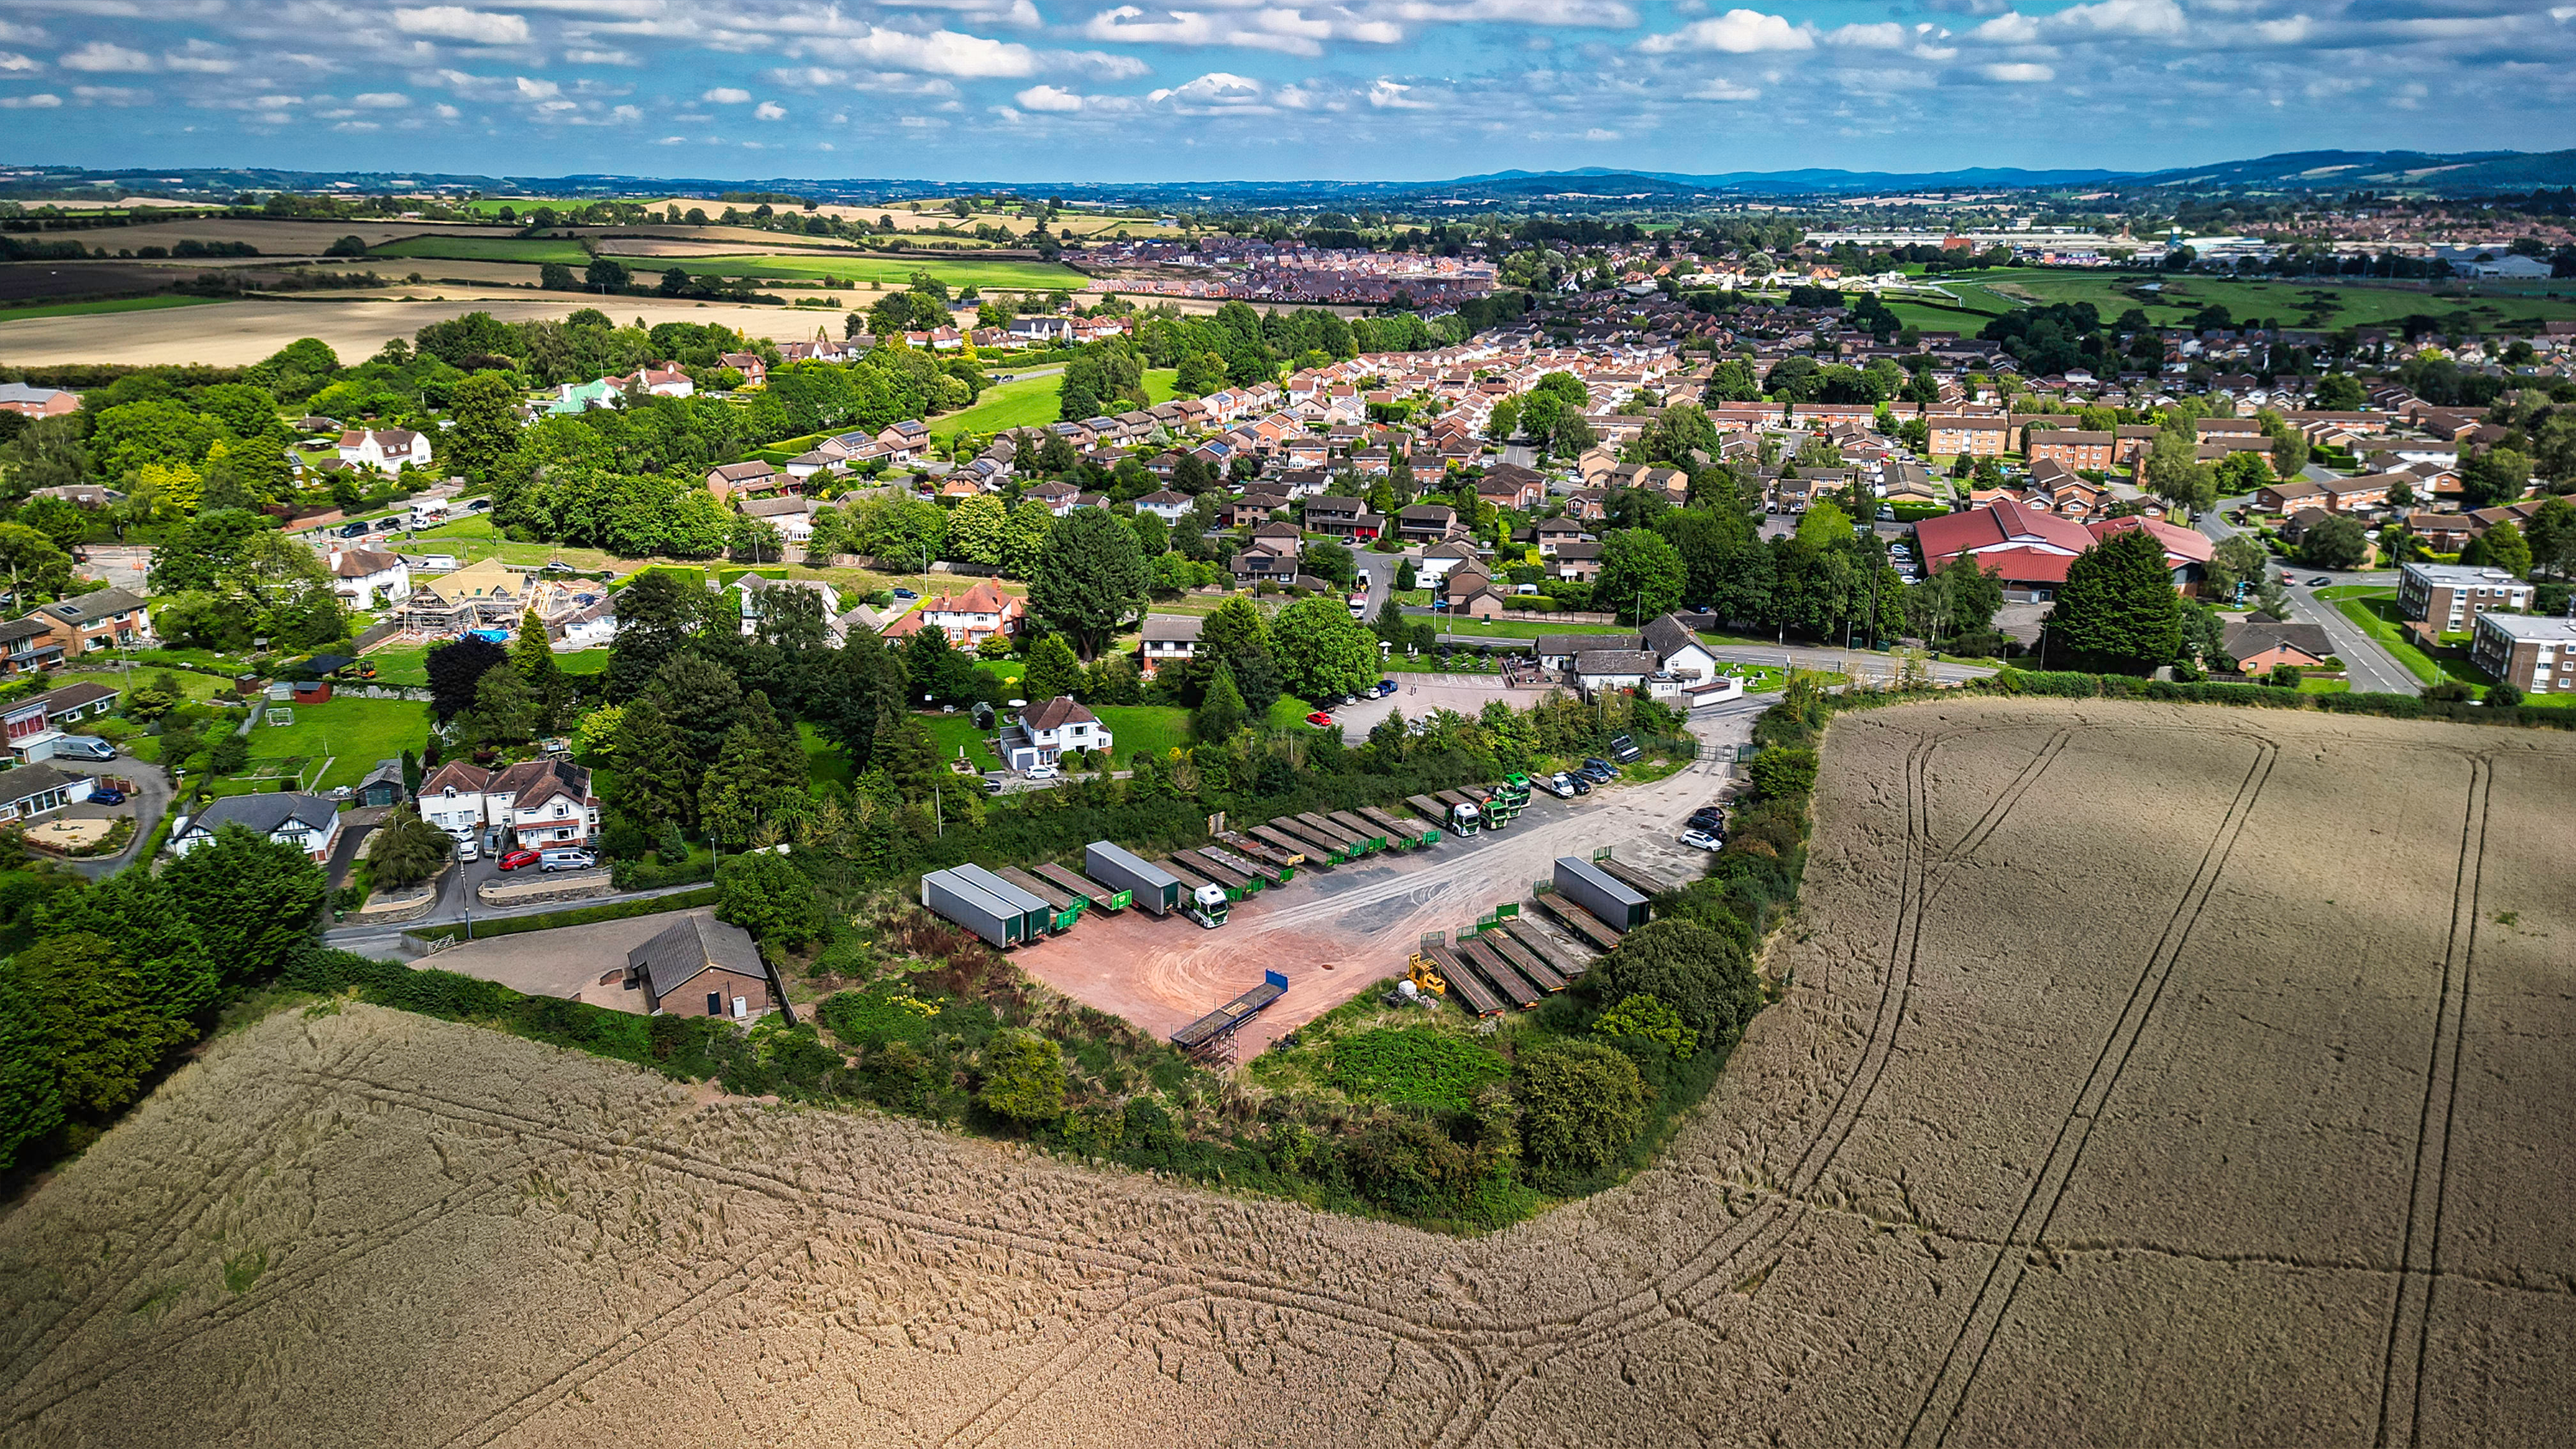 Care Home in Hereford, Herefordshire - Aerial Image